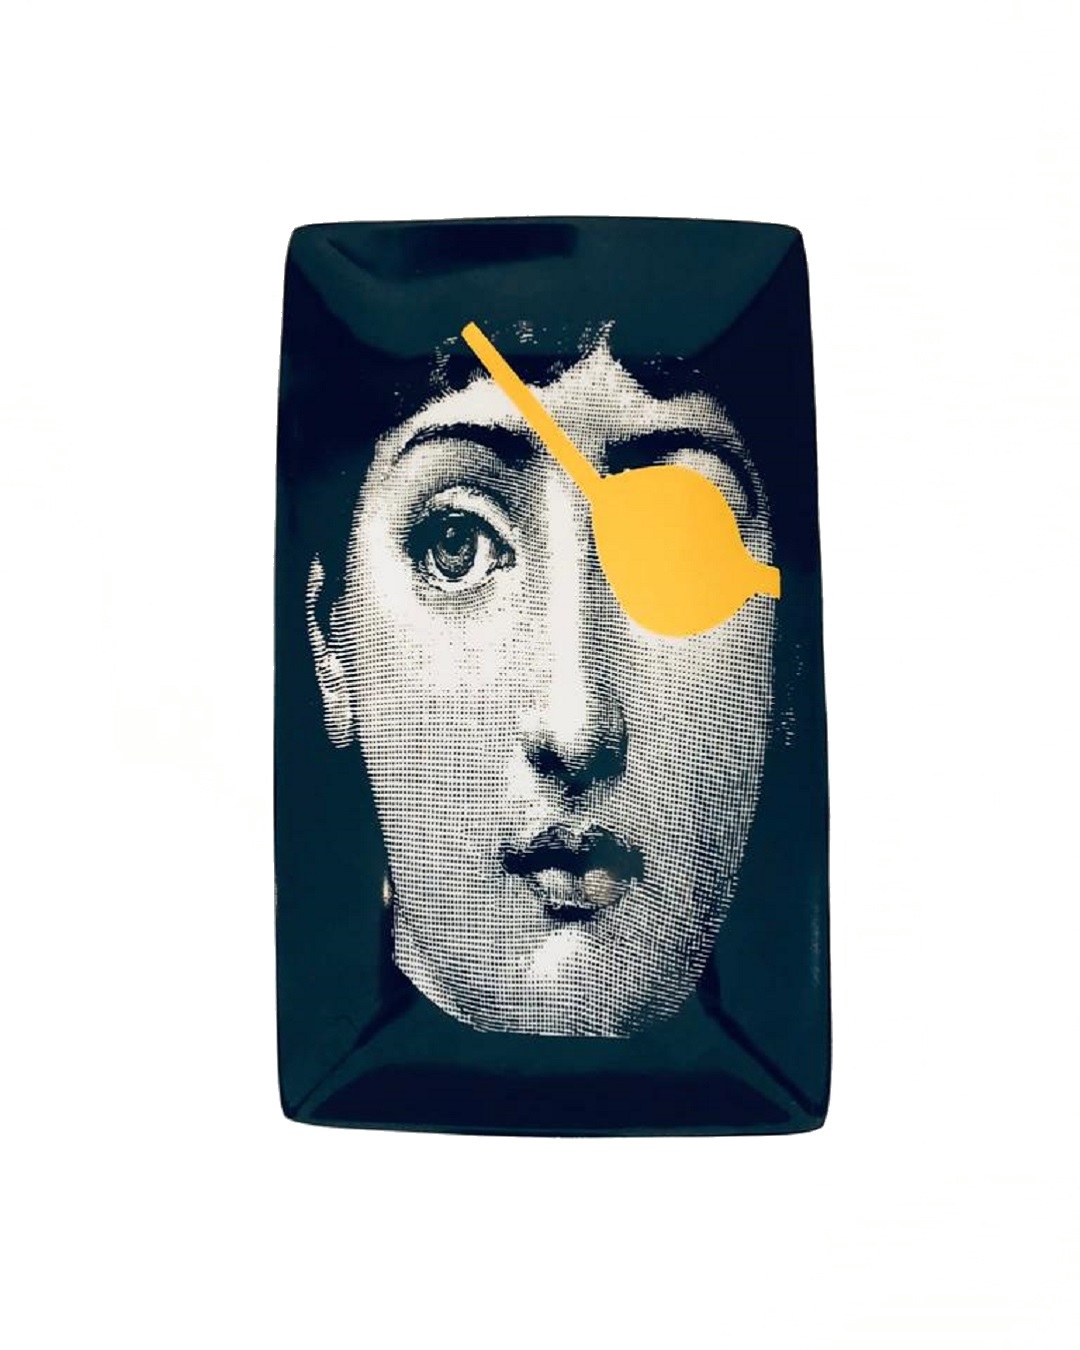 Fornasetti replica eye patch rectangle plate